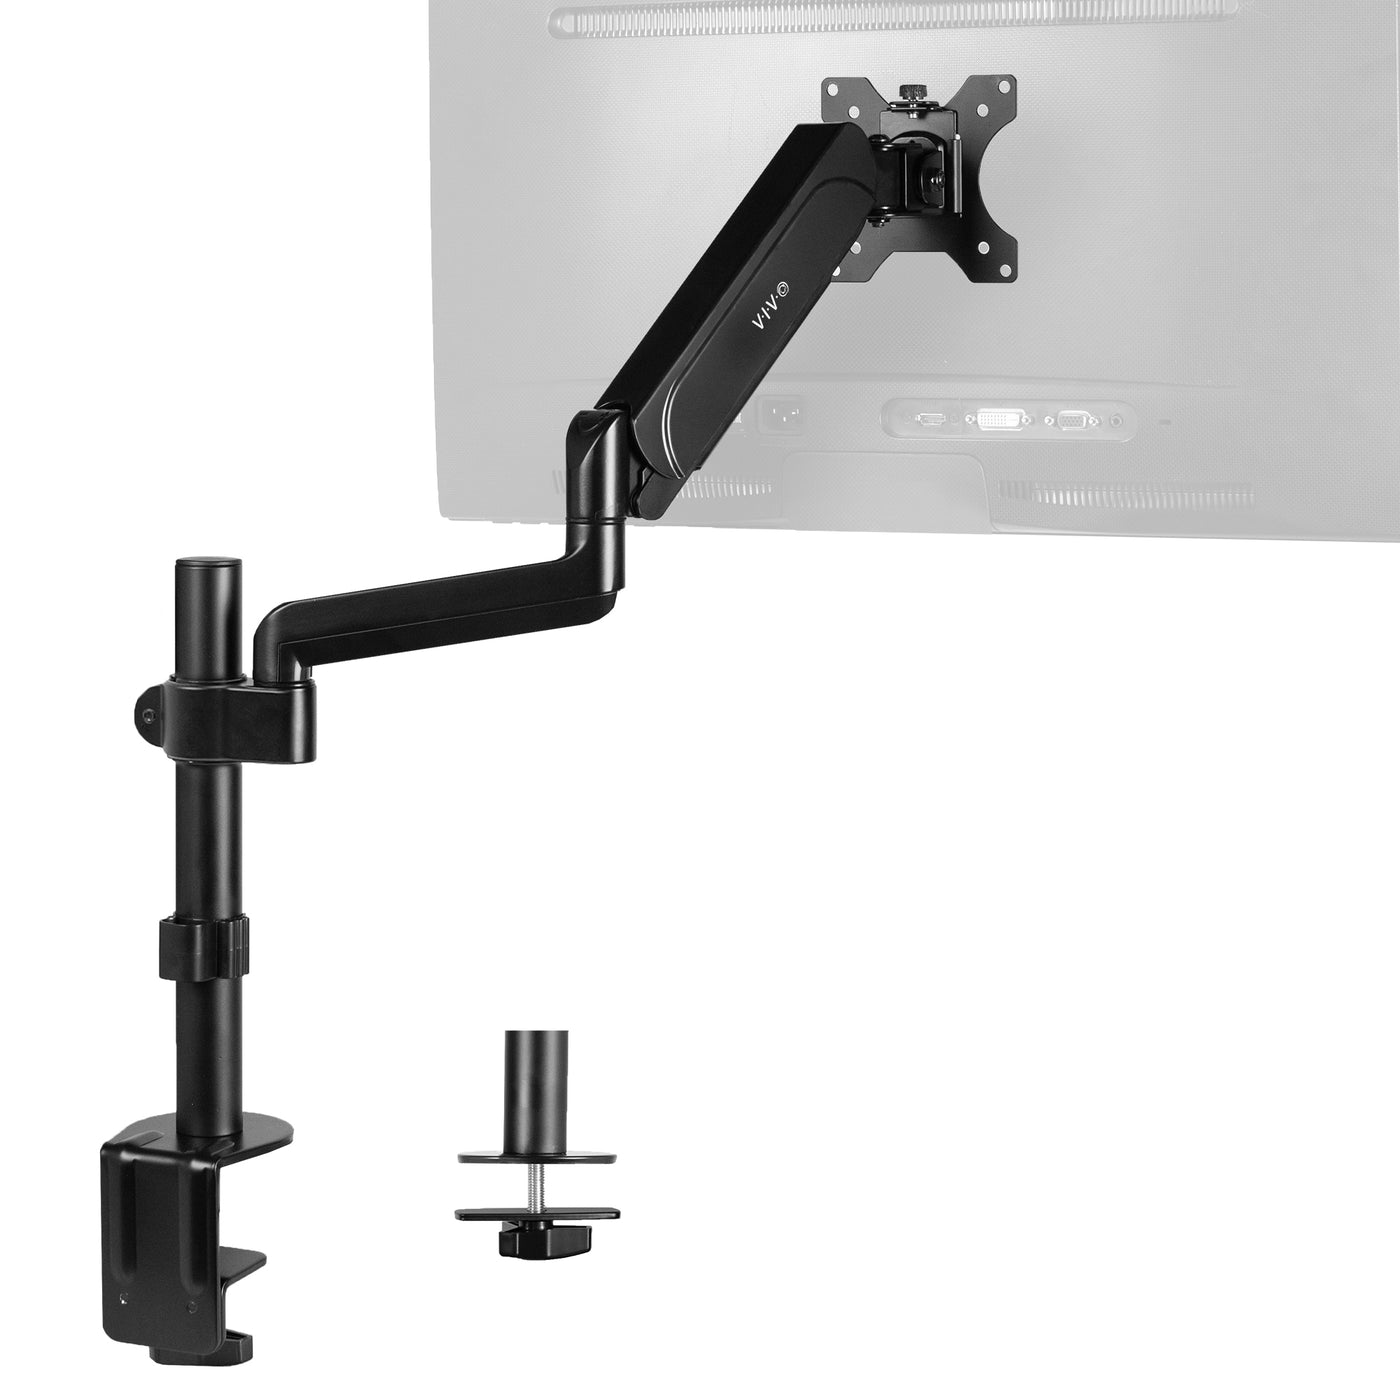 Clamp on pneumatic arm desk mount.